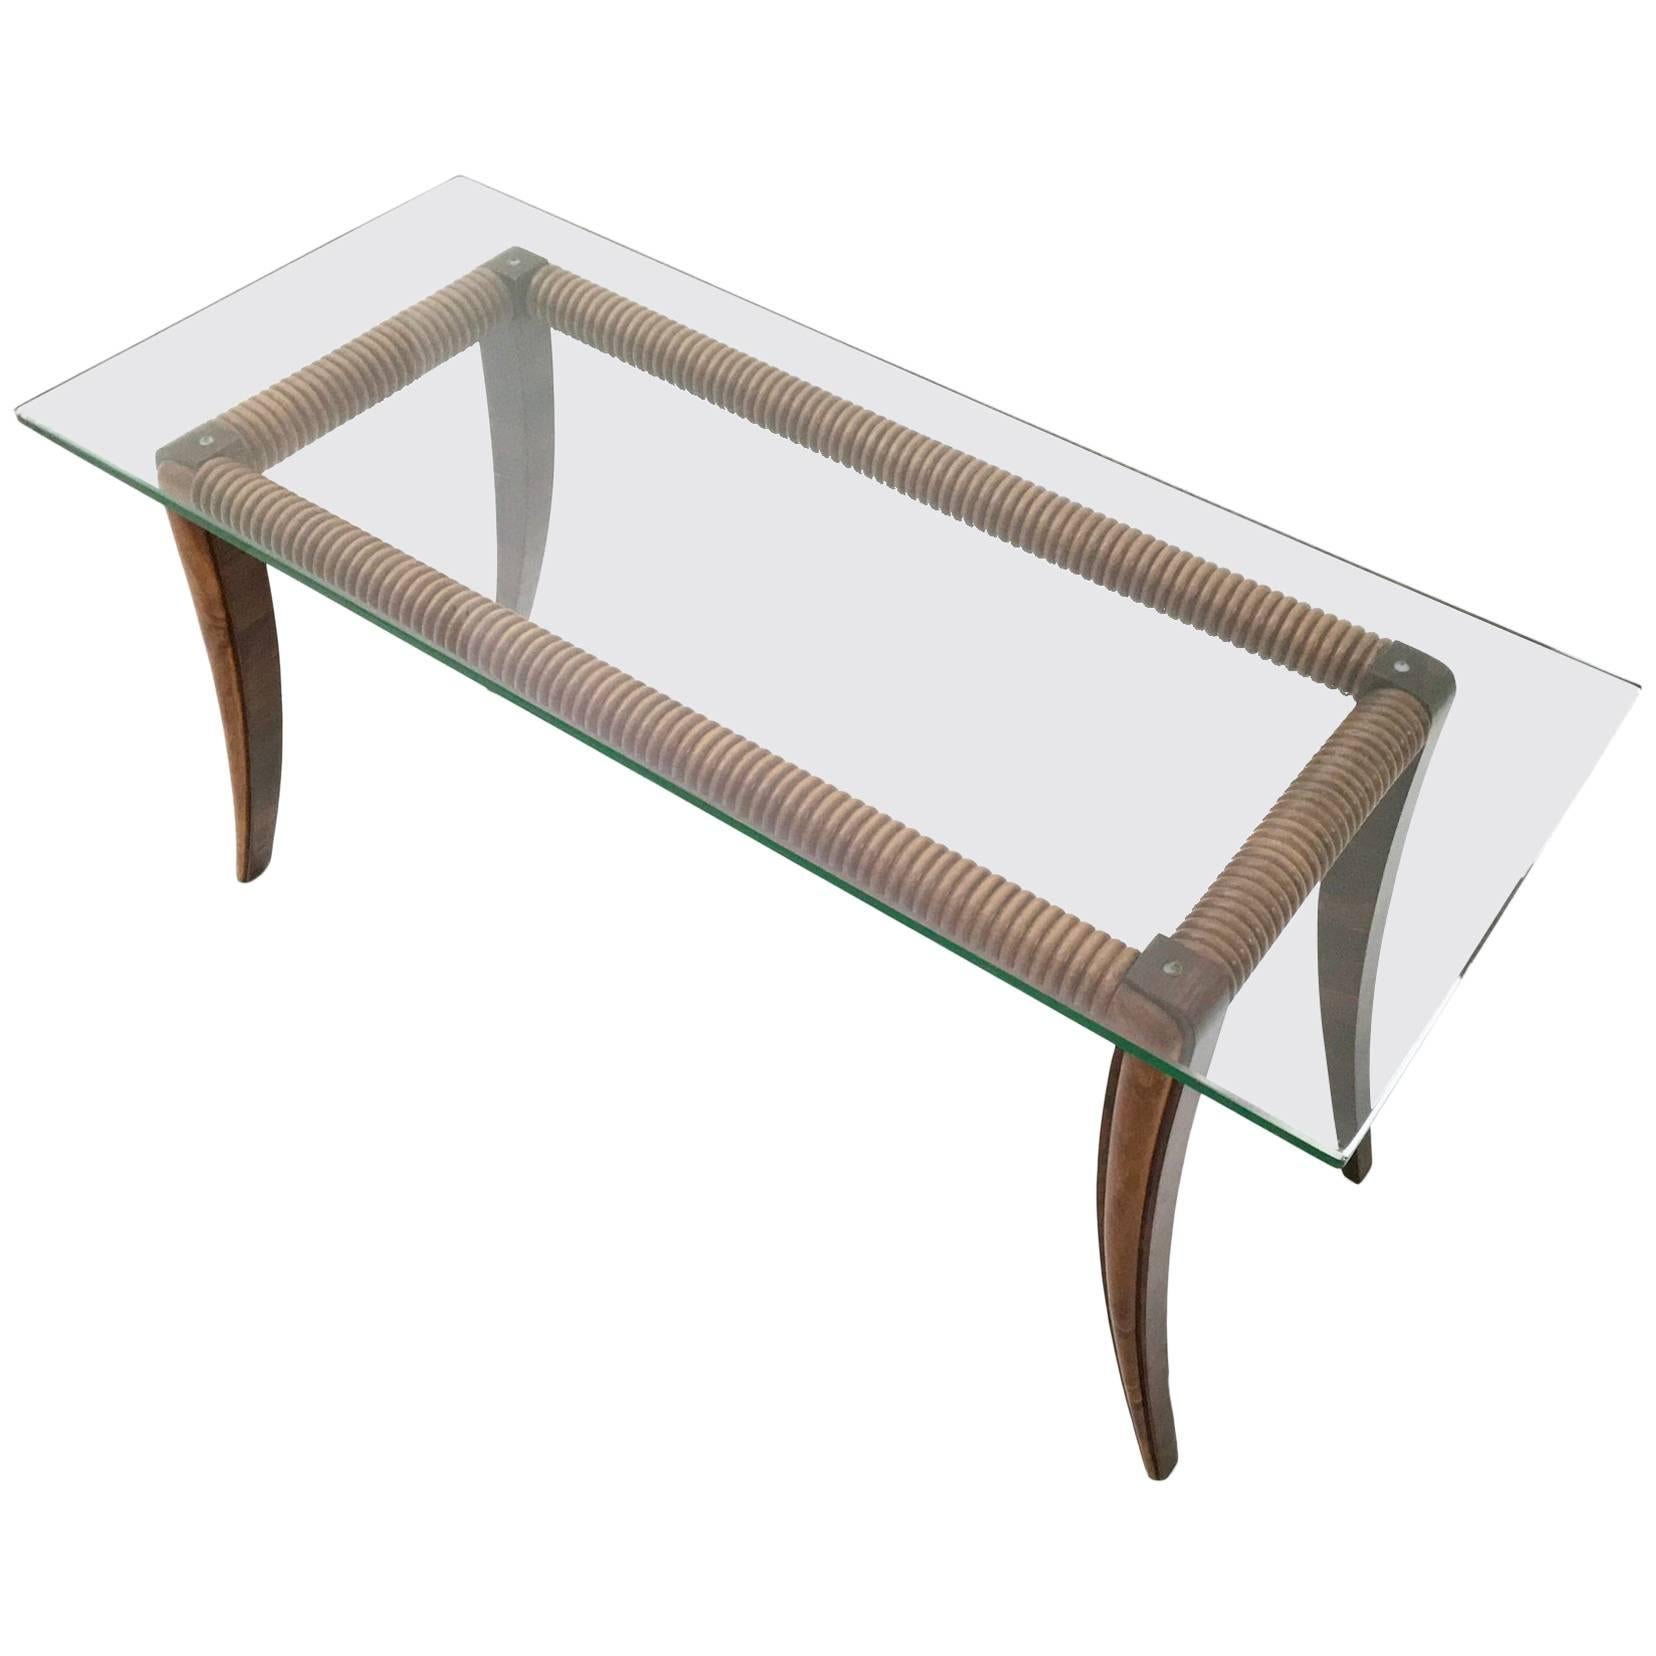 The structure of this beautiful coffee table is in maple and wood. It features a glass top, which is 1.2 cm thick.
It has been perfectly polished and it is in excellent original condition, ready to become a piece in a home.

Measures: Width 100